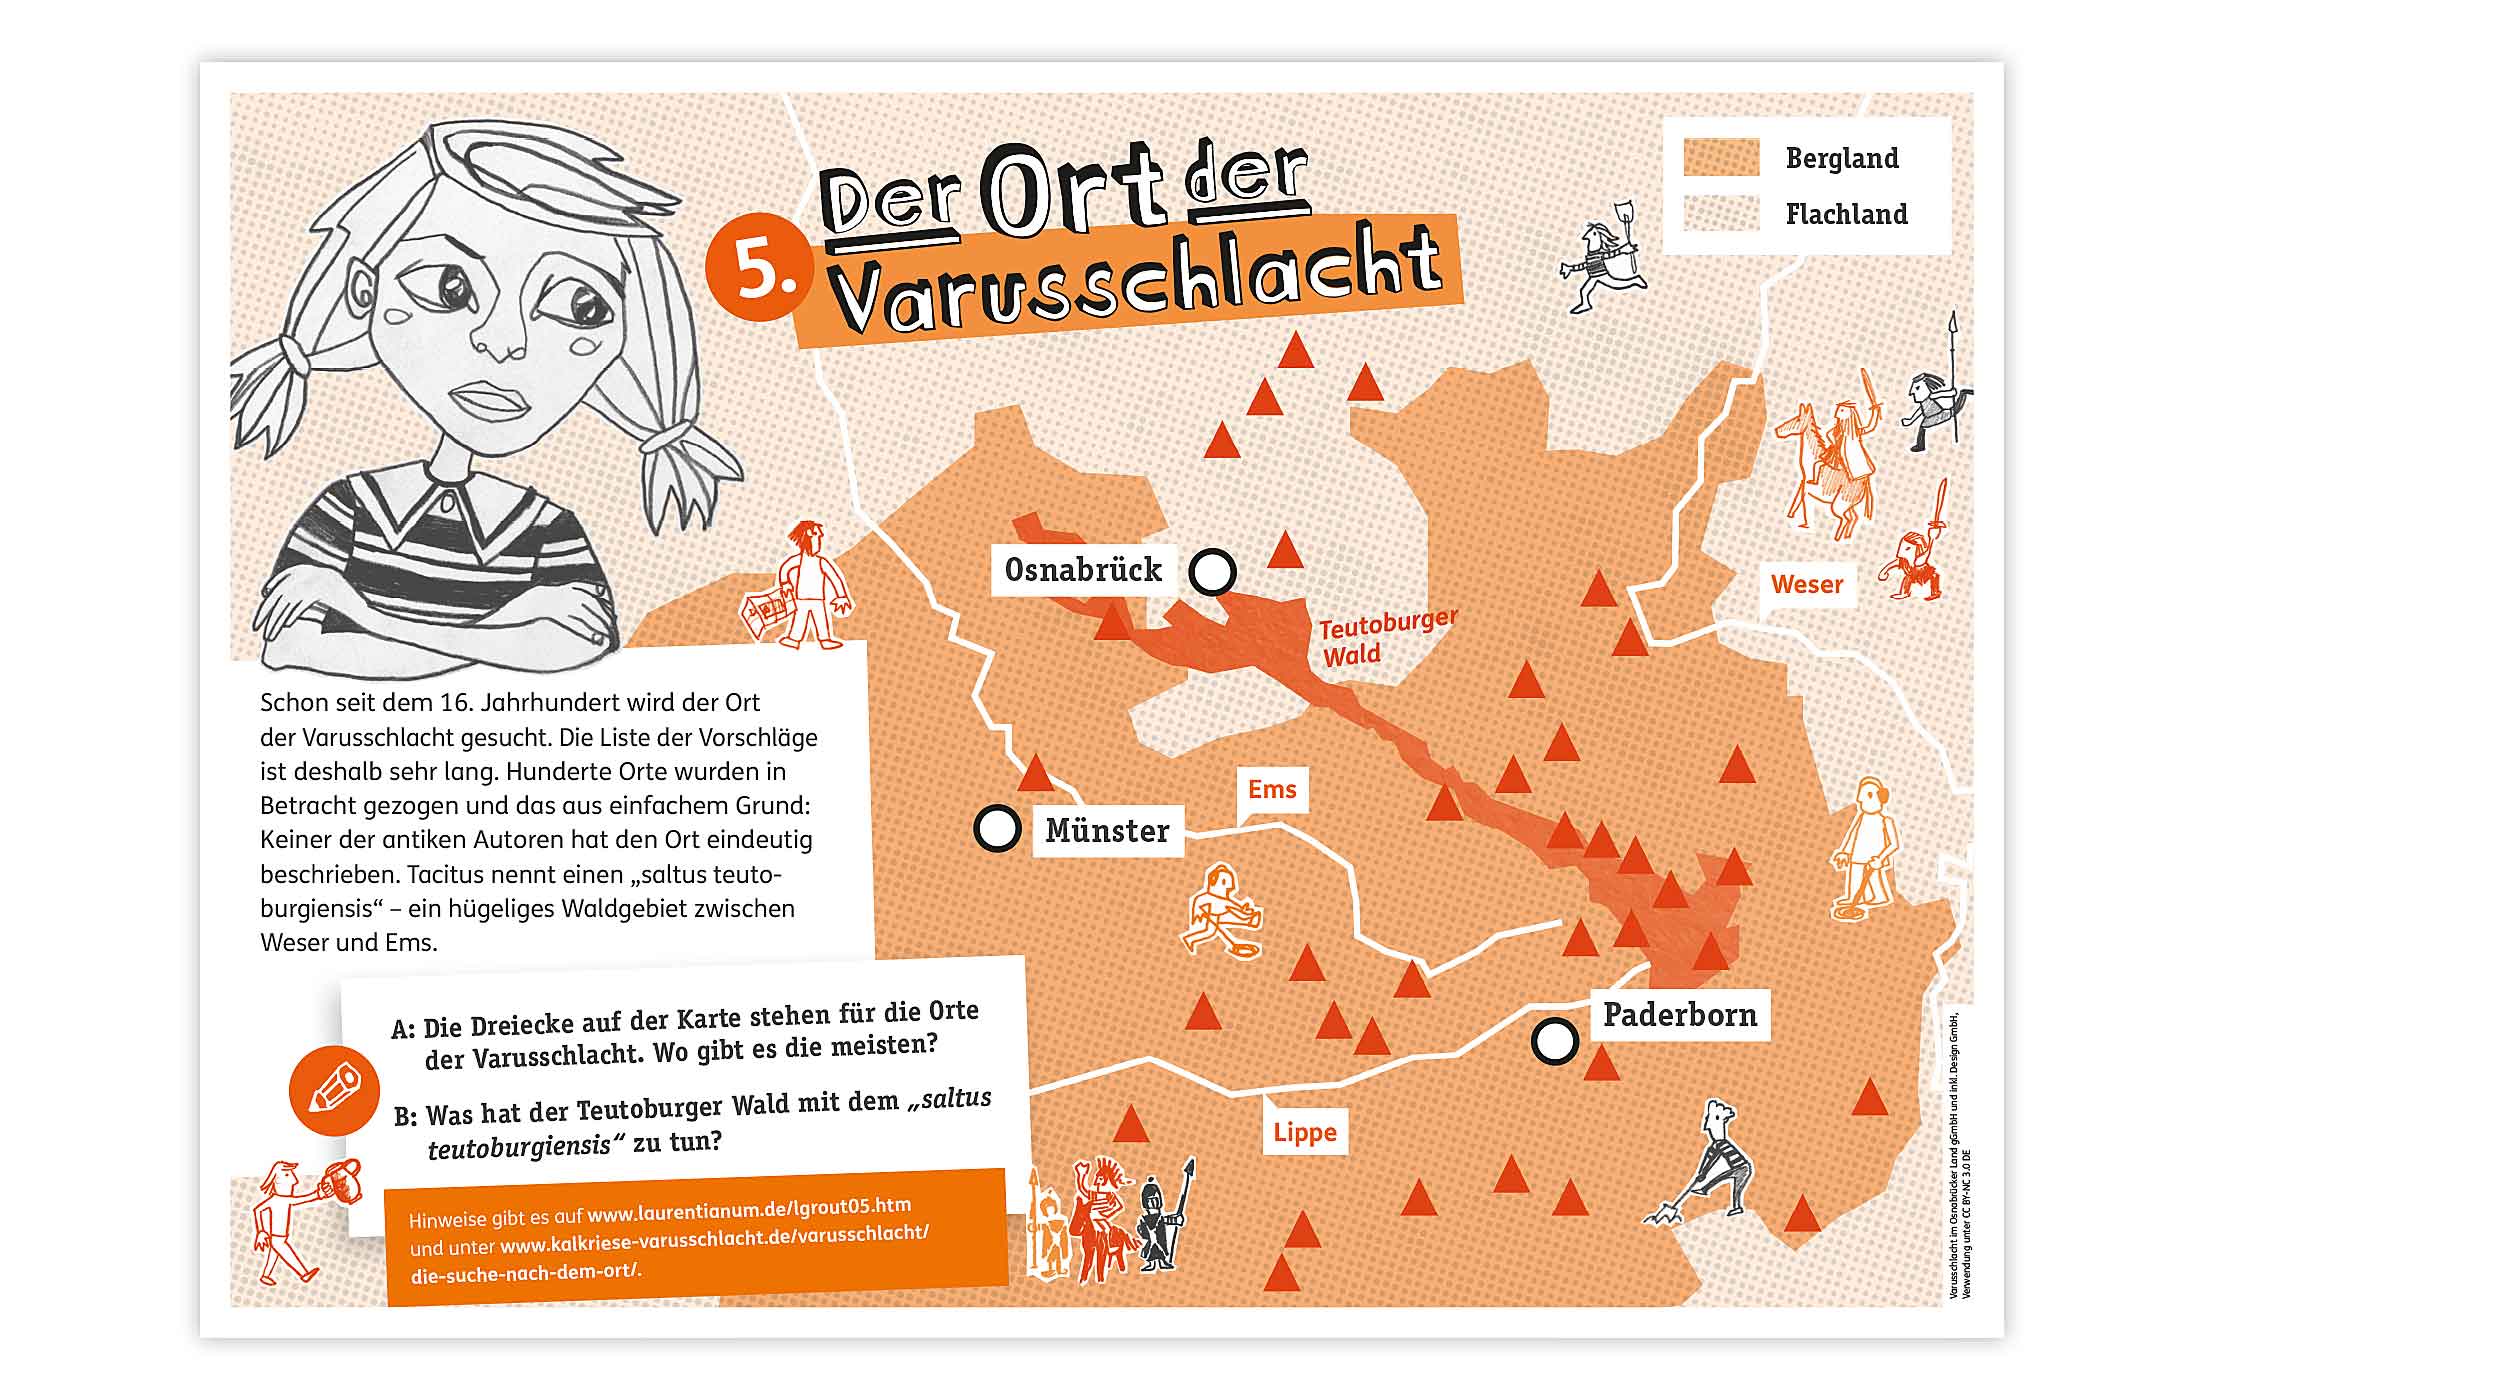 Worksheet "The site of the Varus Battle", on which Sophie illustrates the most important battle sites on a map.